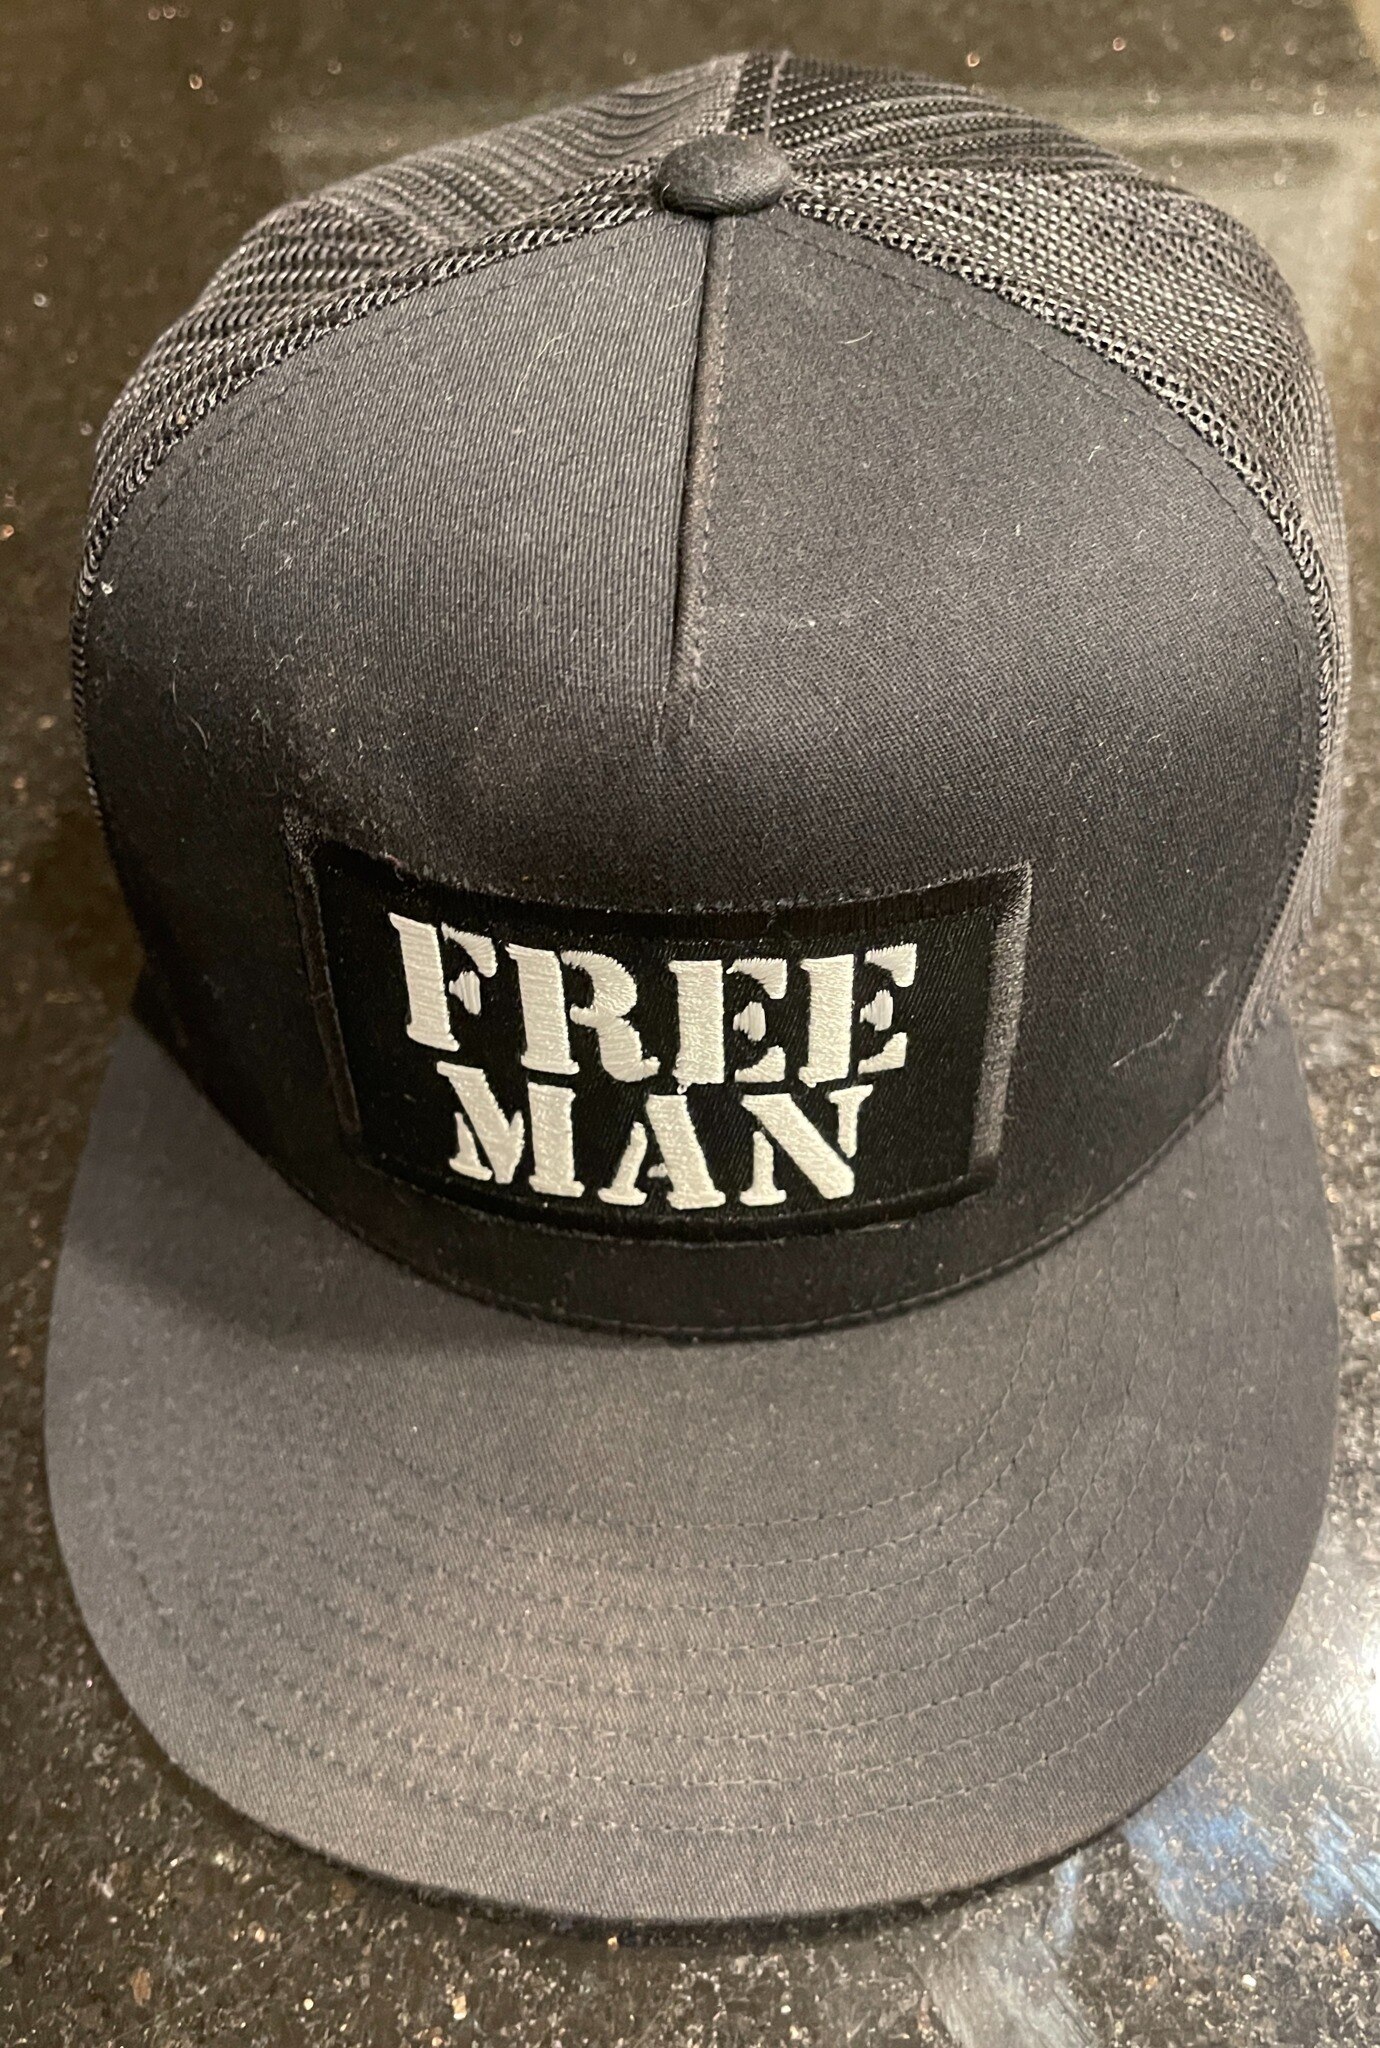 AlanHostetter on GETTR : This Free Man hat and this Trump Ring were ...